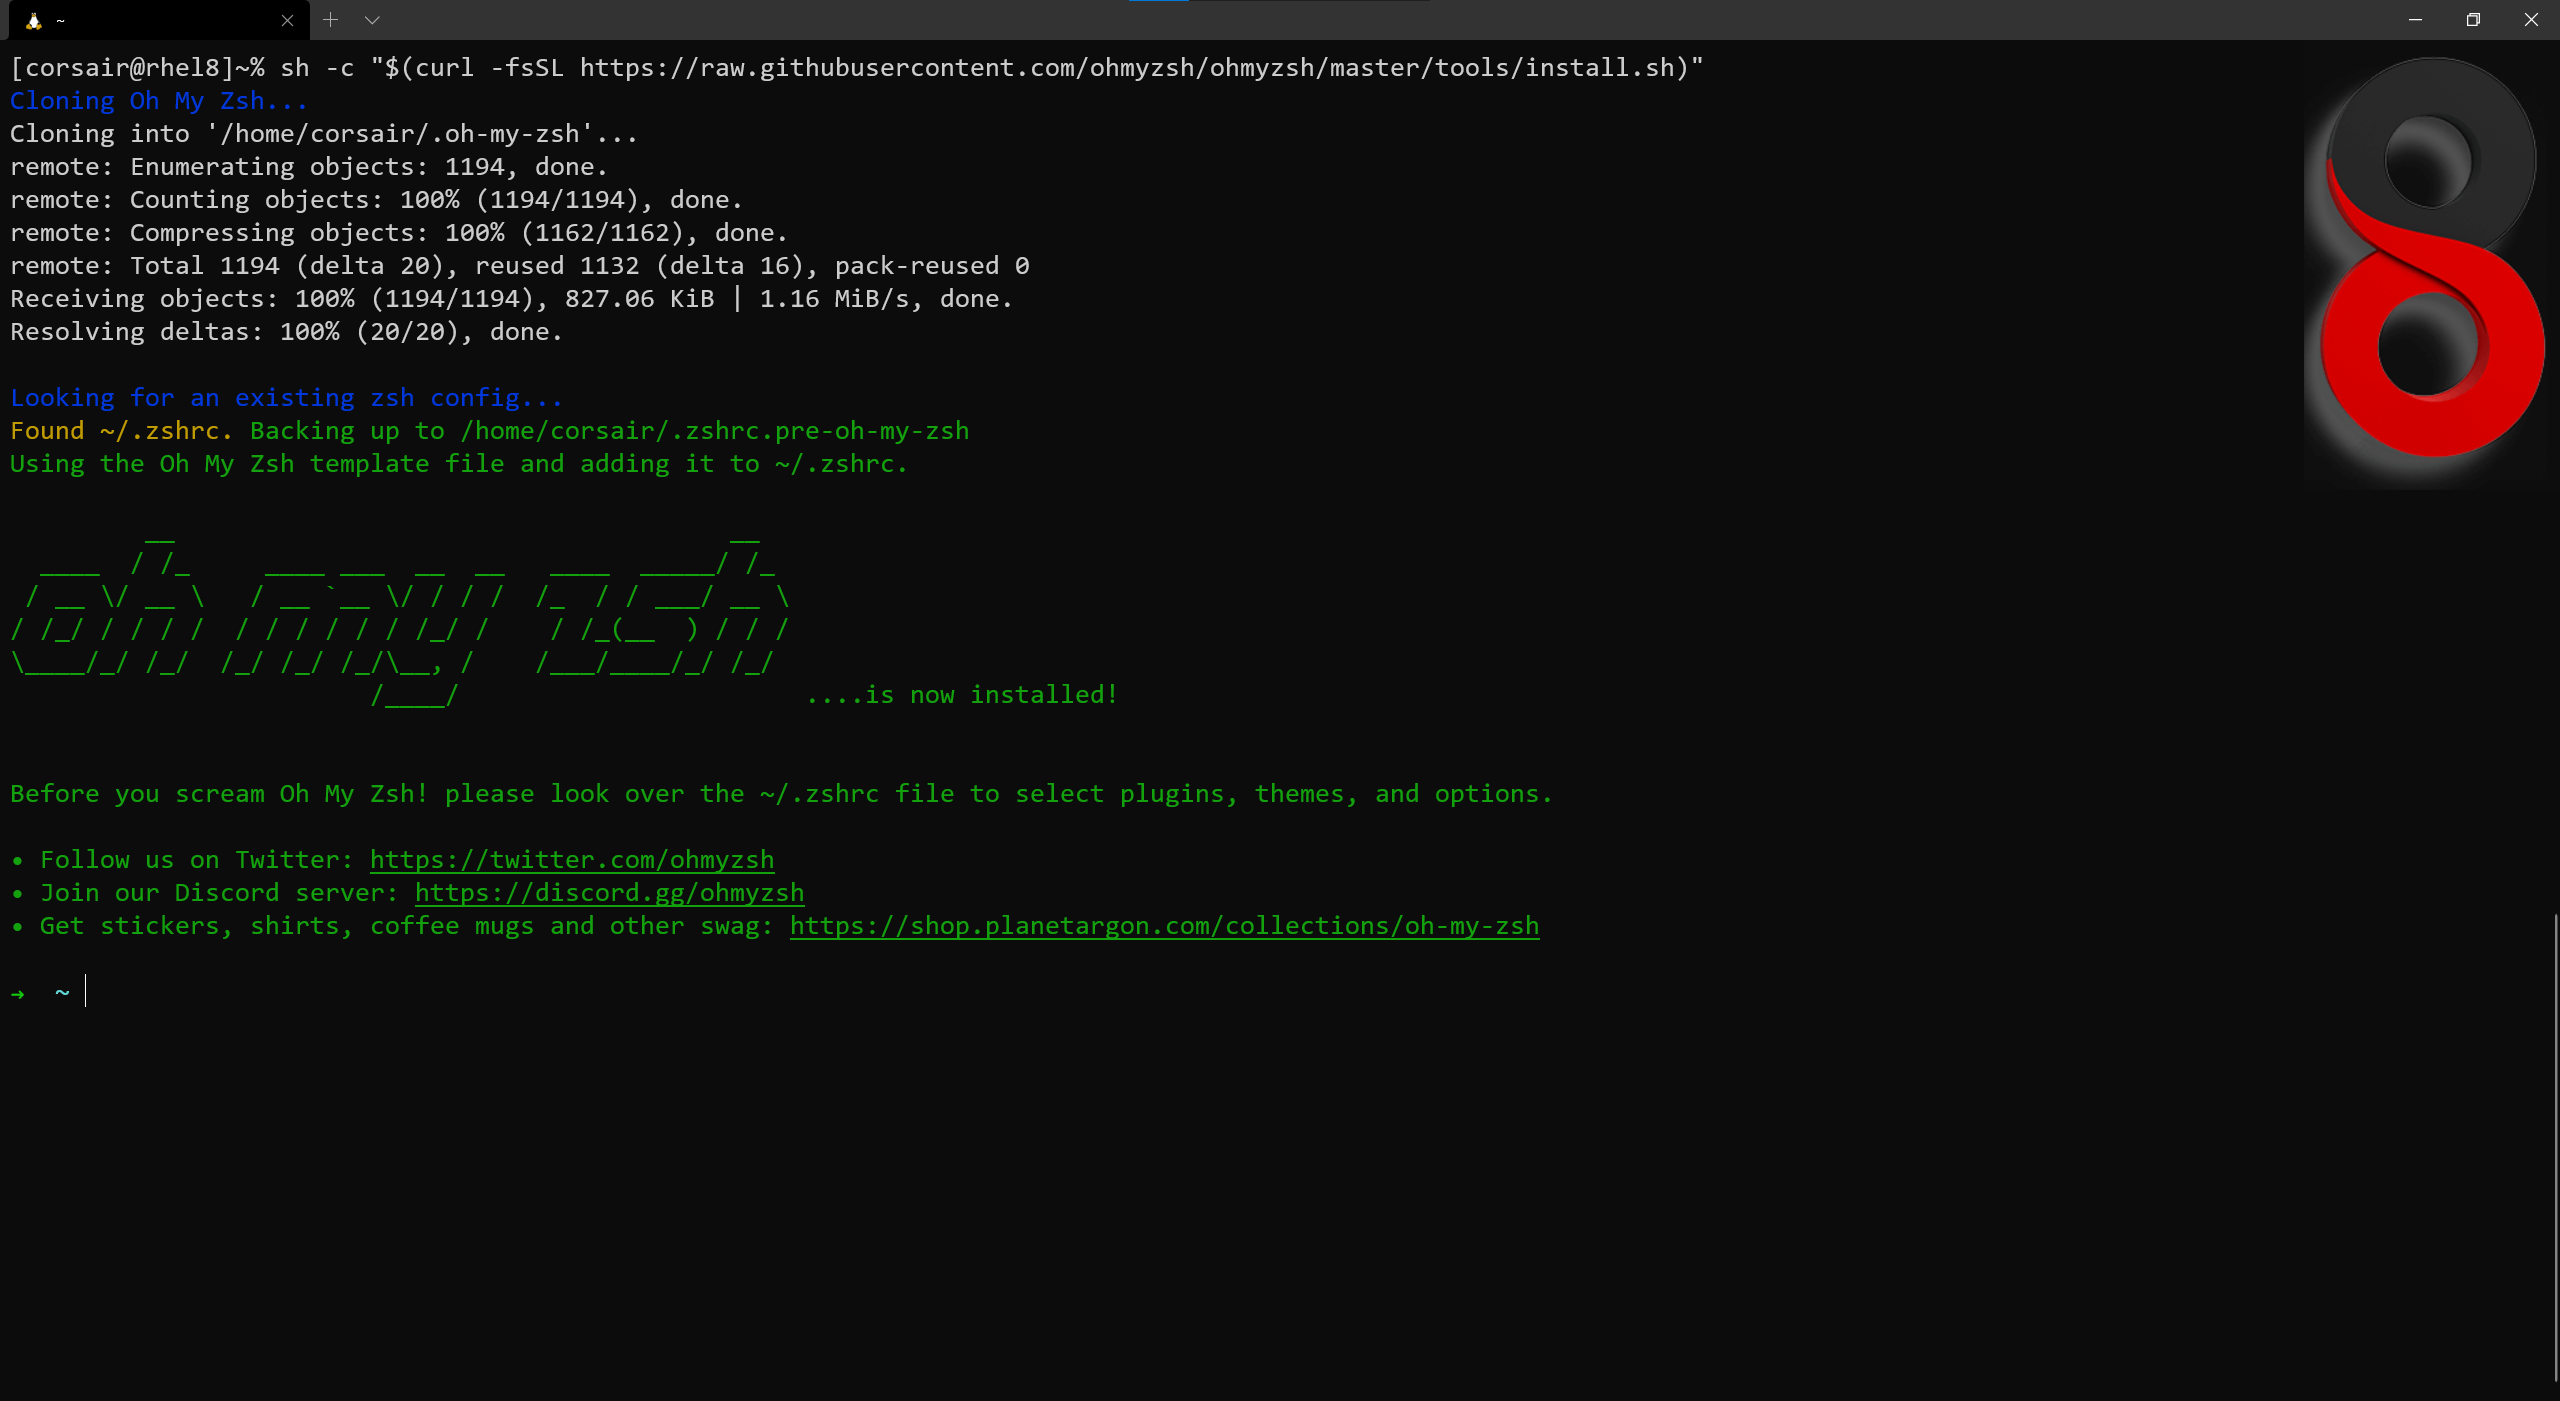 Install oh my zsh